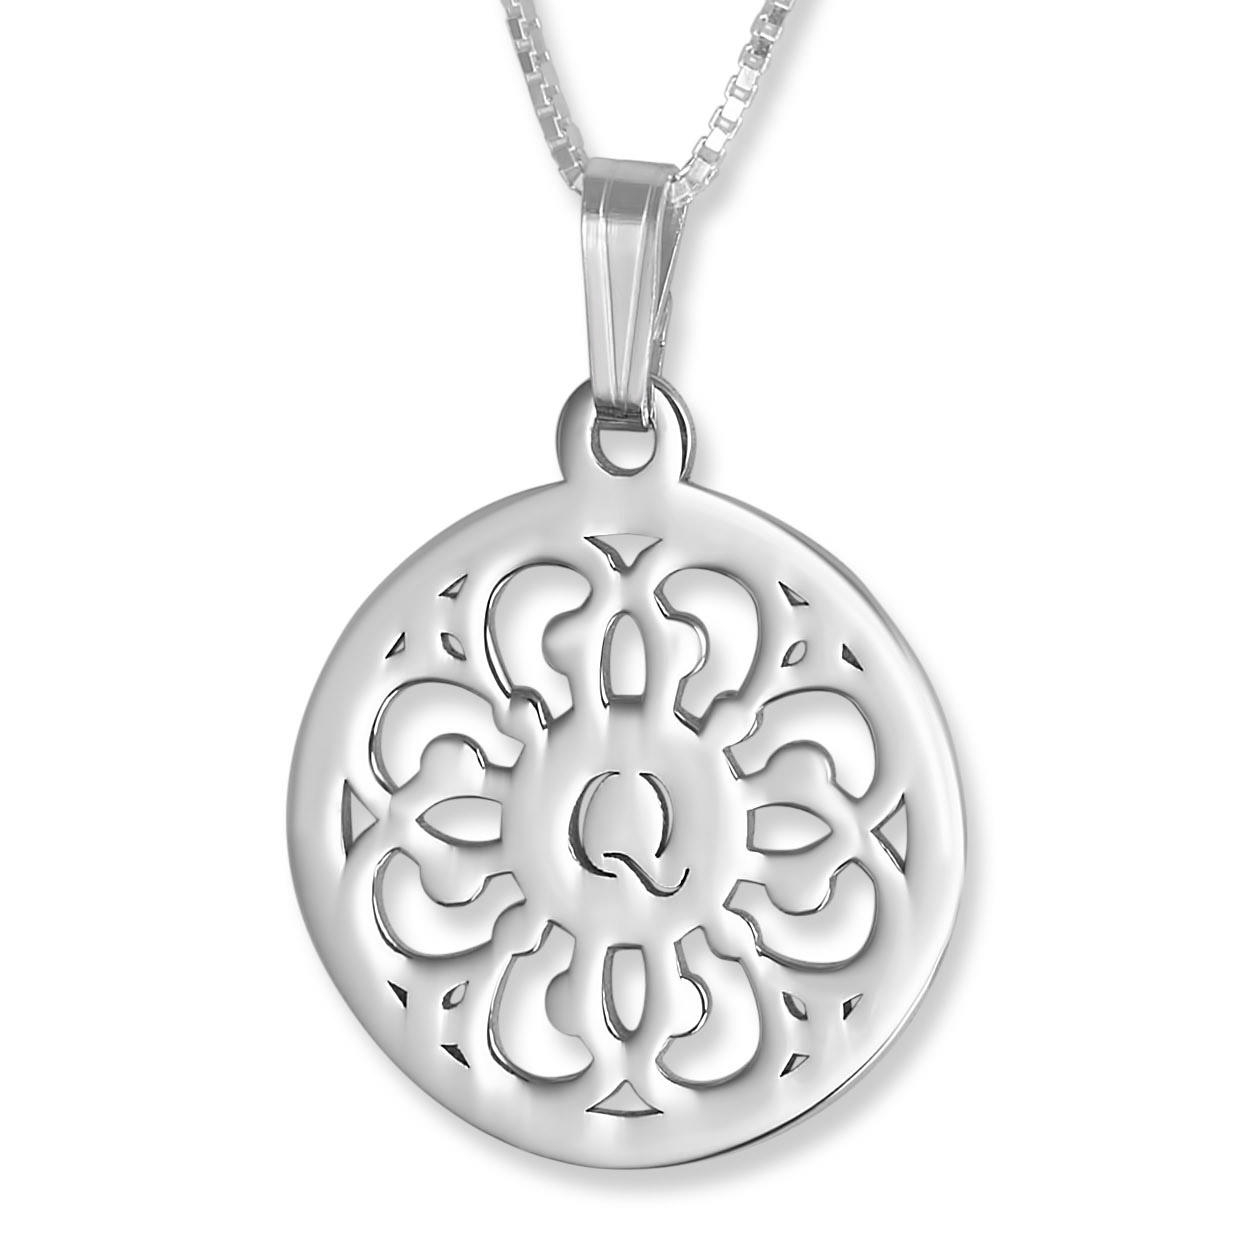 Flower Initial Necklace, Laser-Cut Pendant, Sterling Silver - 1